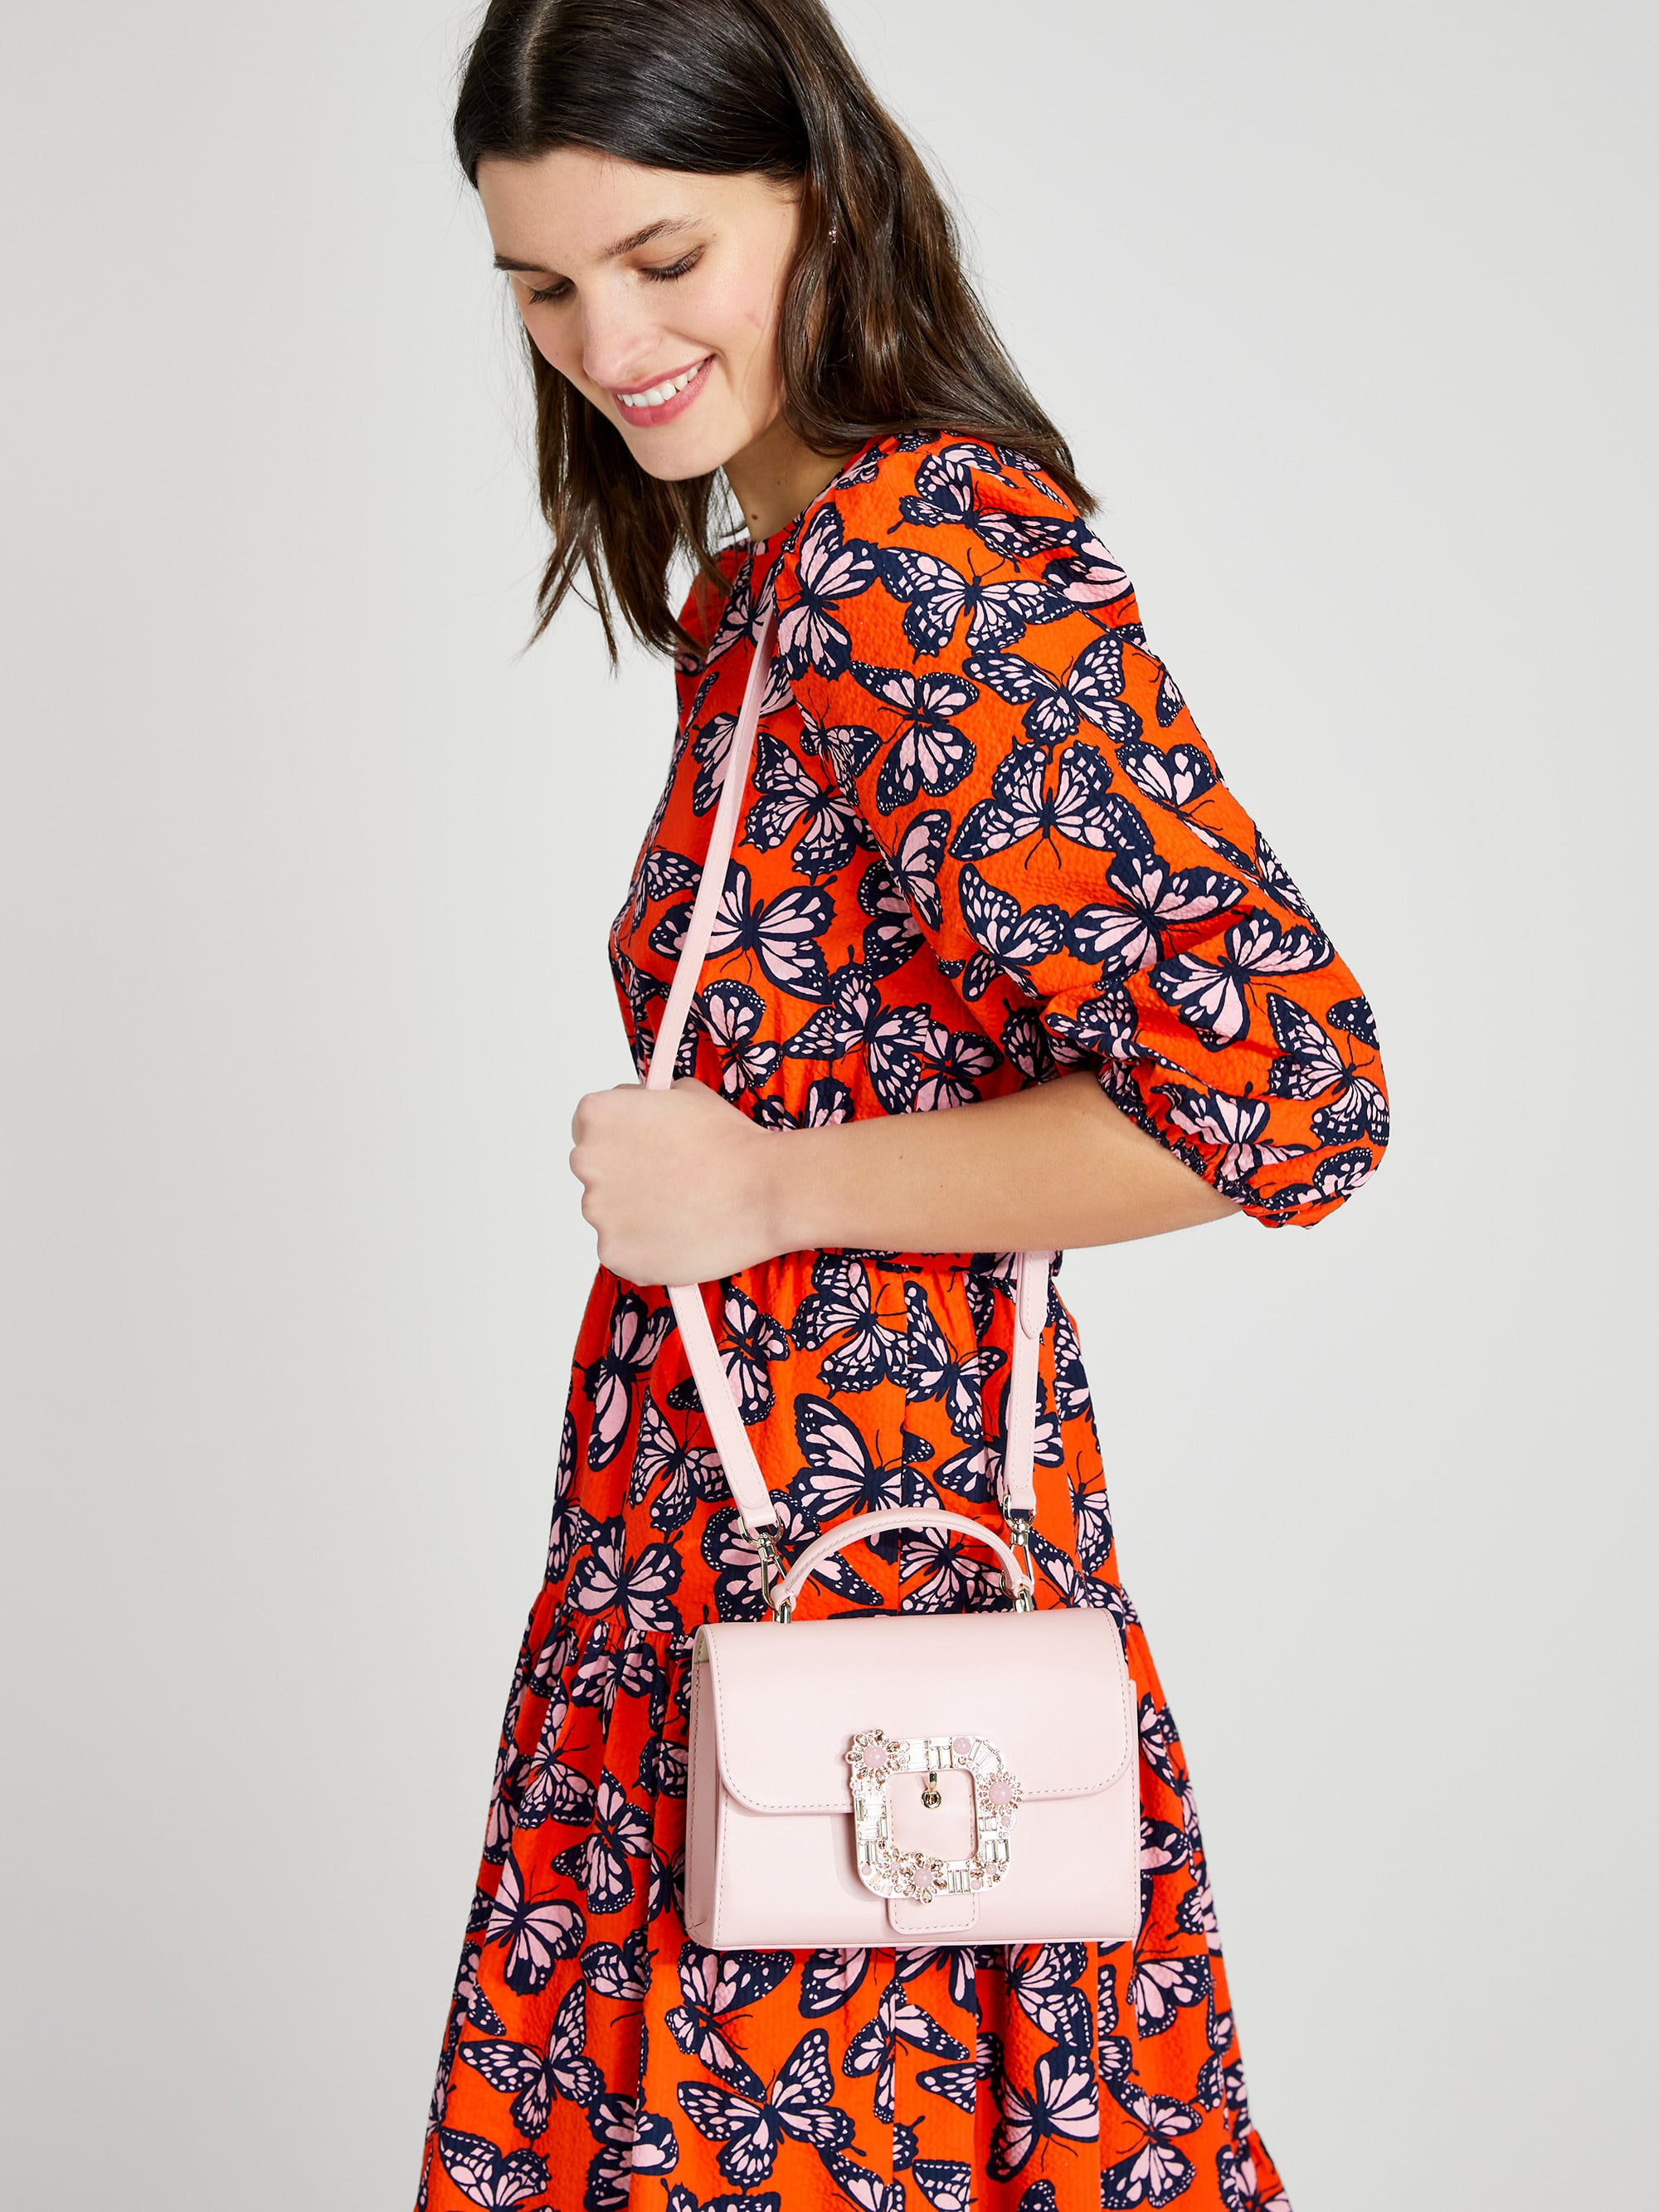 Kate Spade New York Launches The Knott Handbag For Spring 2021 A Modern  Classic With A Fashion Twist That Stands Out In A Crowd — SSI Life